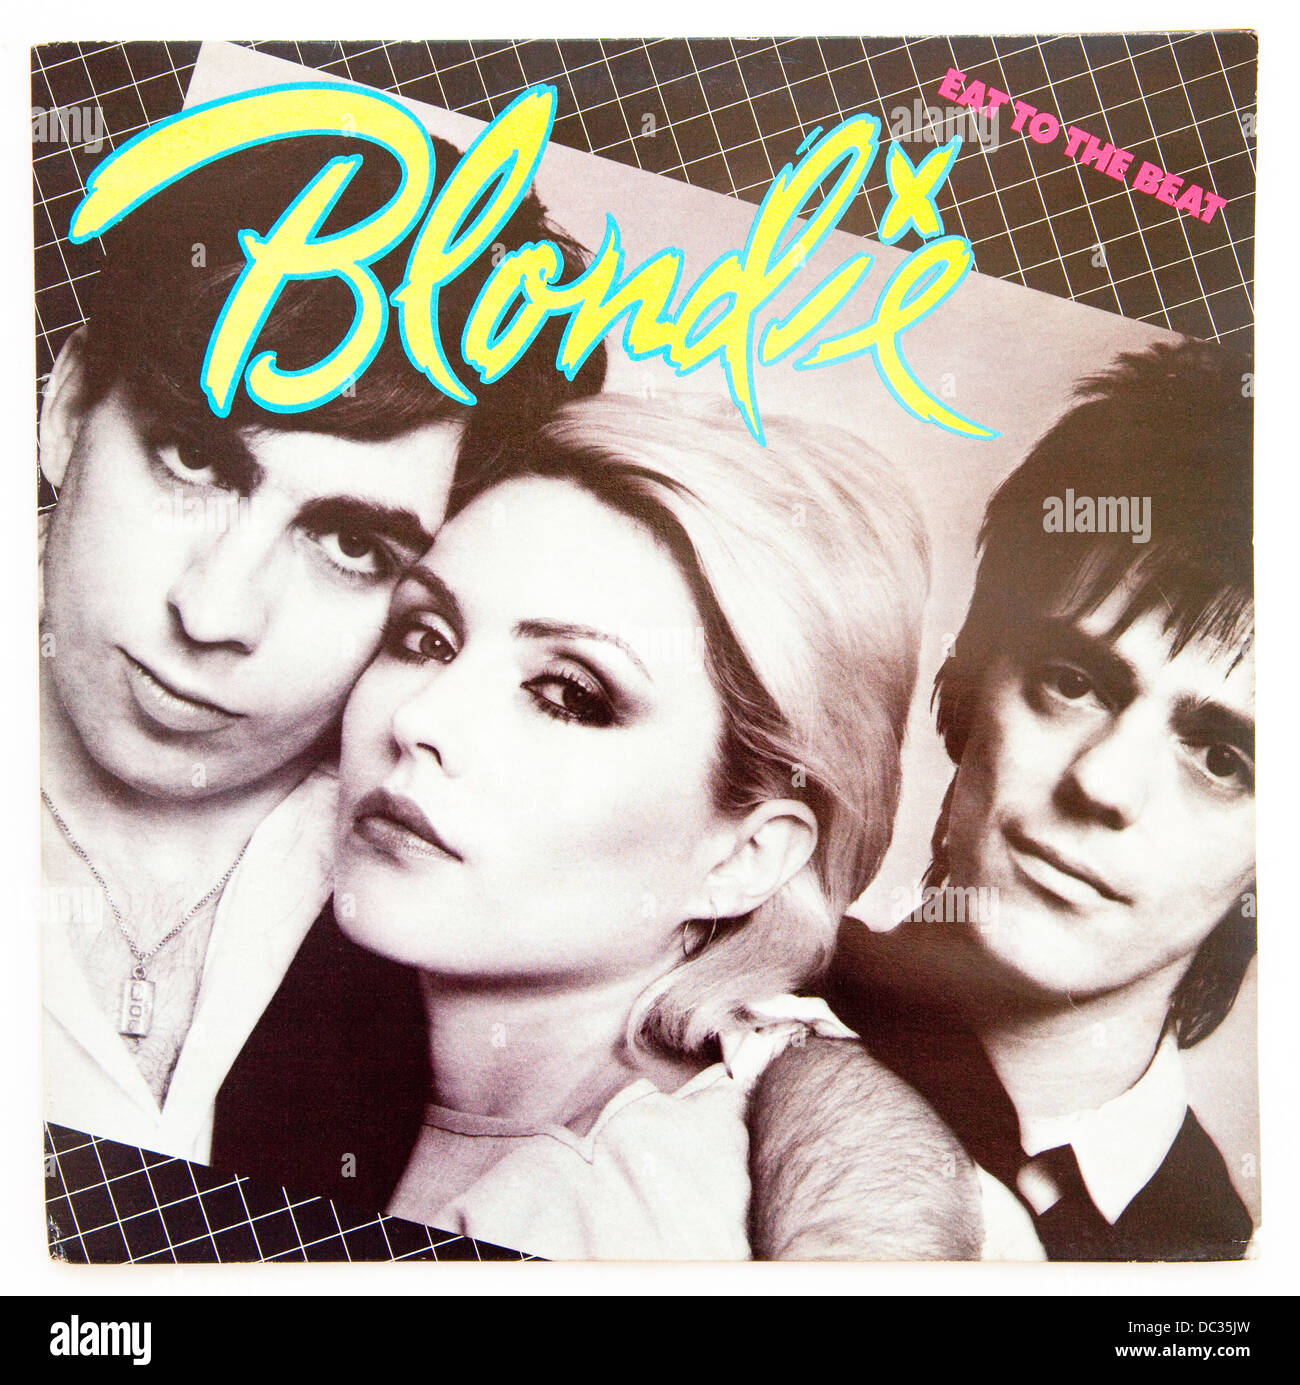 Blondie - Eat To The Beat, 1979 album on Chrysalis - Editorial use only Stock Photo